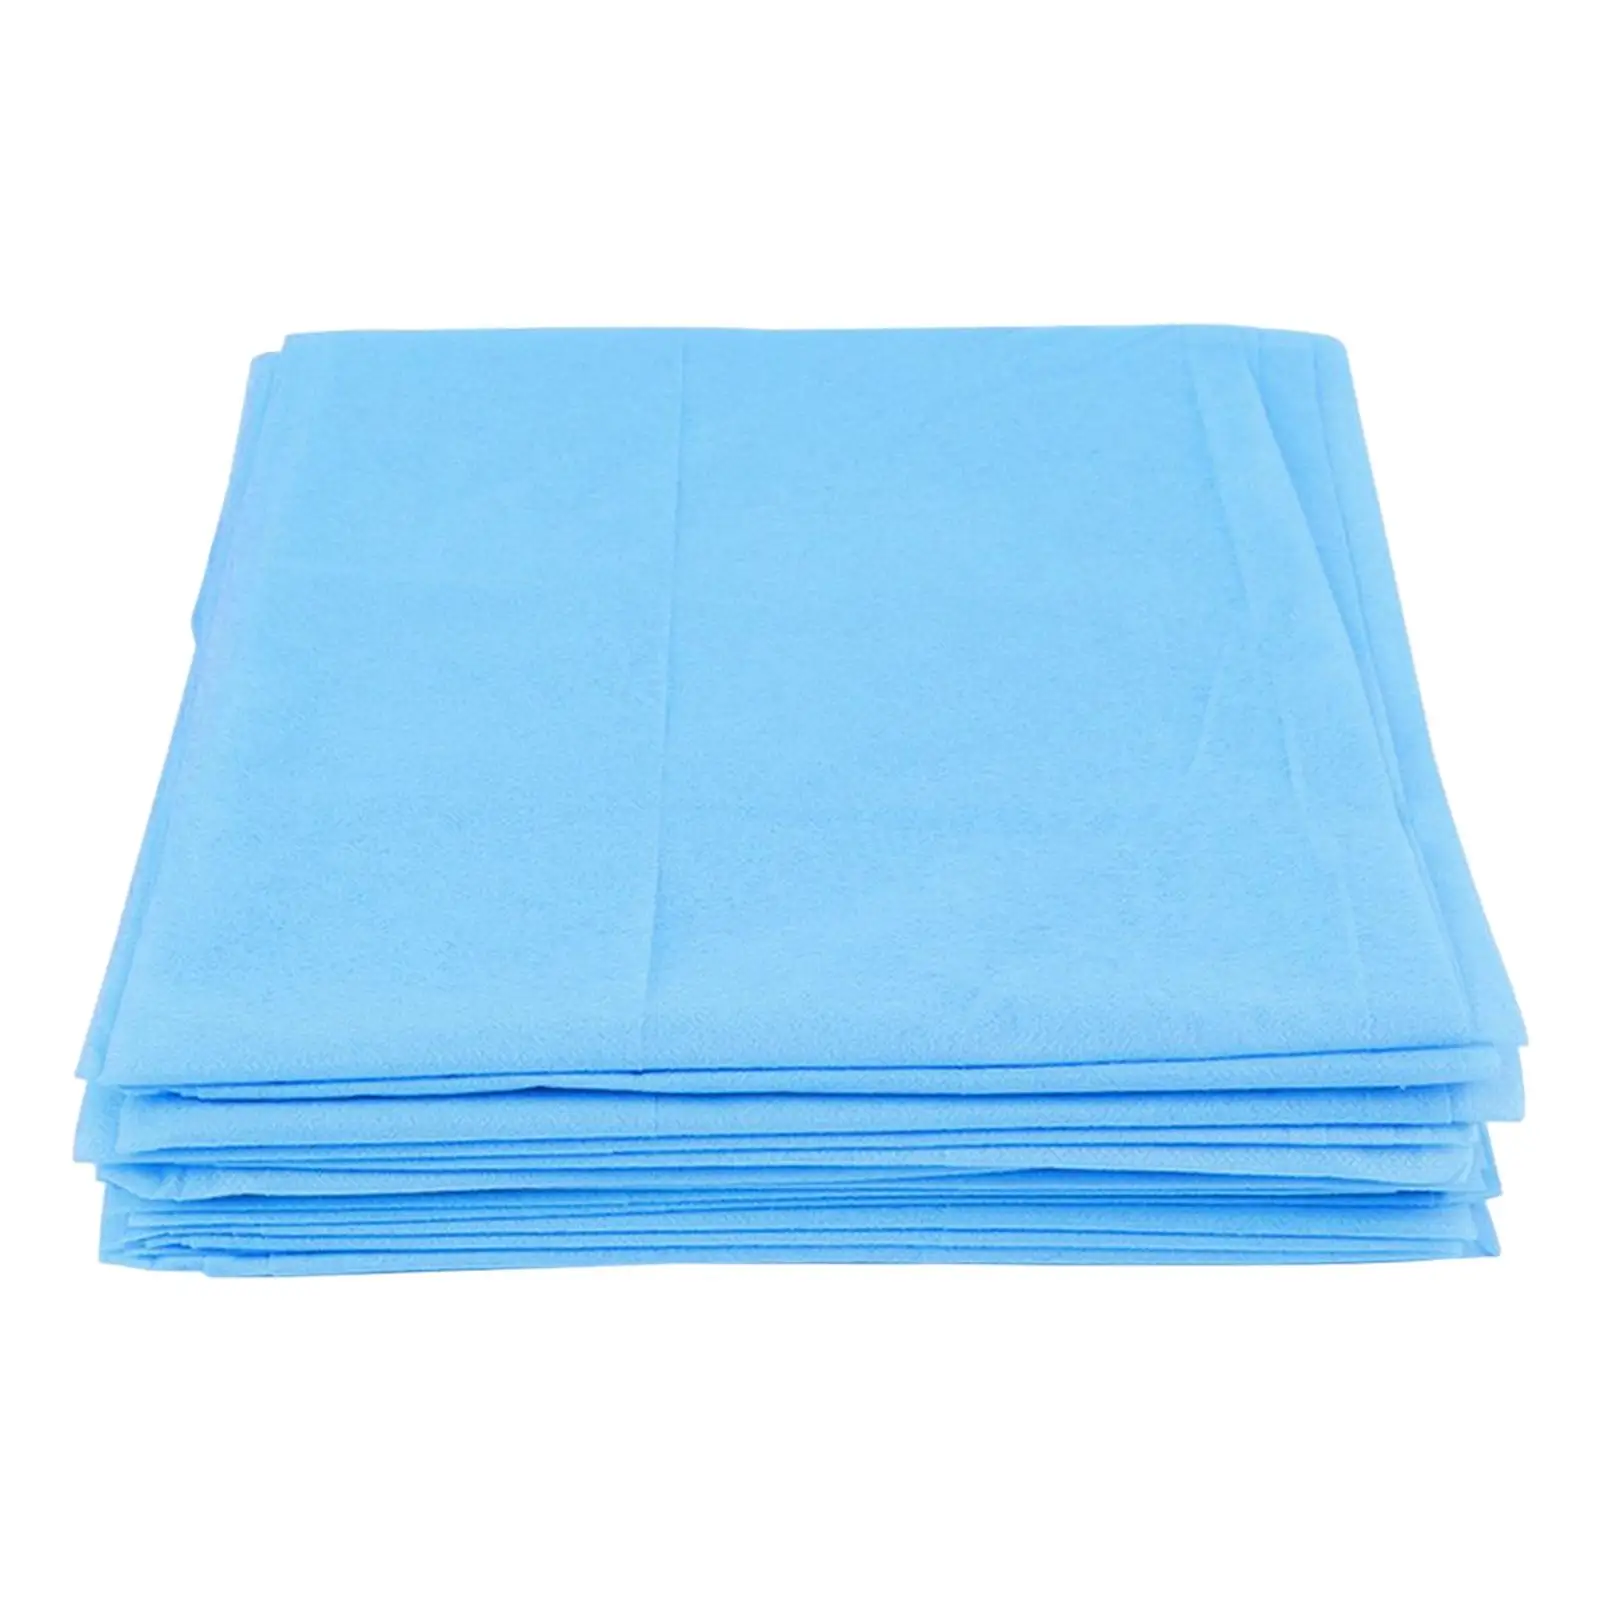 10x Bed Table Cover Massage Bed Cover Non Woven for Inside Travel